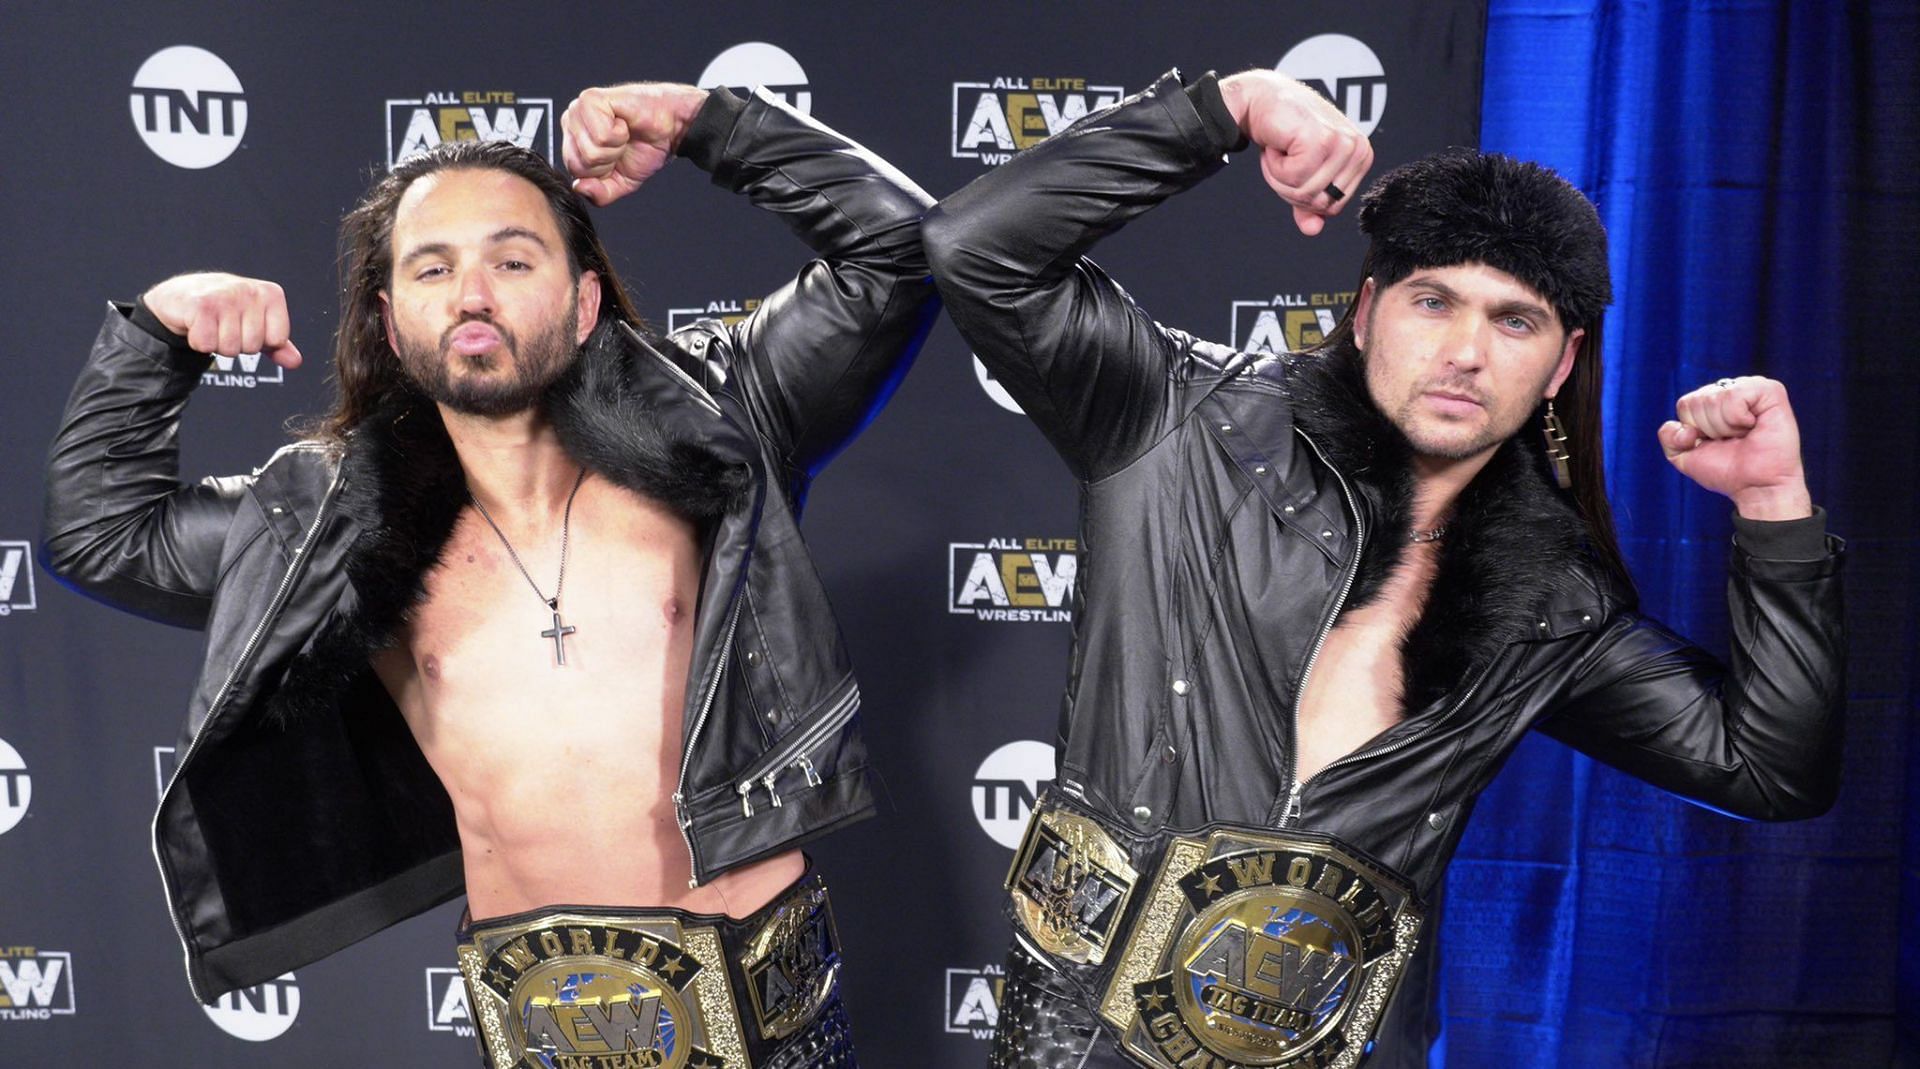 The Young Bucks were the longest-reigning AEW World Tag Team Champions